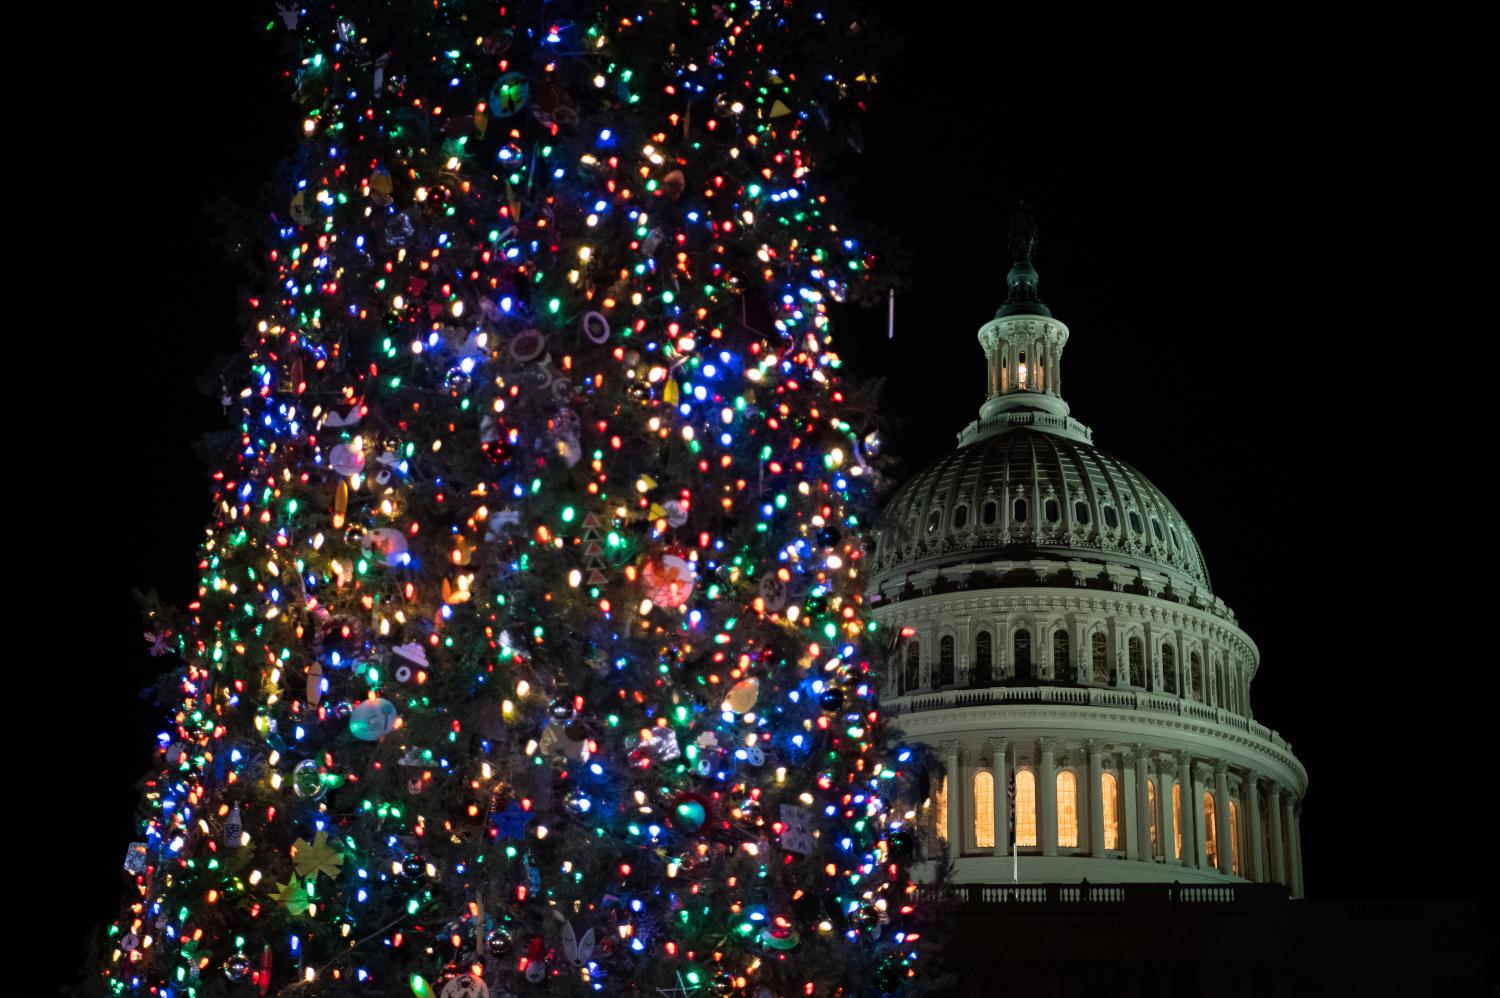 A general view of the U.S. Capitol after the Capitol Christmas Tree Lighting Ceremony in Washington, D.C., on Wednesday, December 1, 2021. With a government shutdown approaching on Friday, Congress is working to put together a short-term spending compromise while Democrats continue to negotiate President Biden's Build Back Better agenda in a hectic December on the Hill. (Graeme Sloan/Sipa USA)No Use Germany.